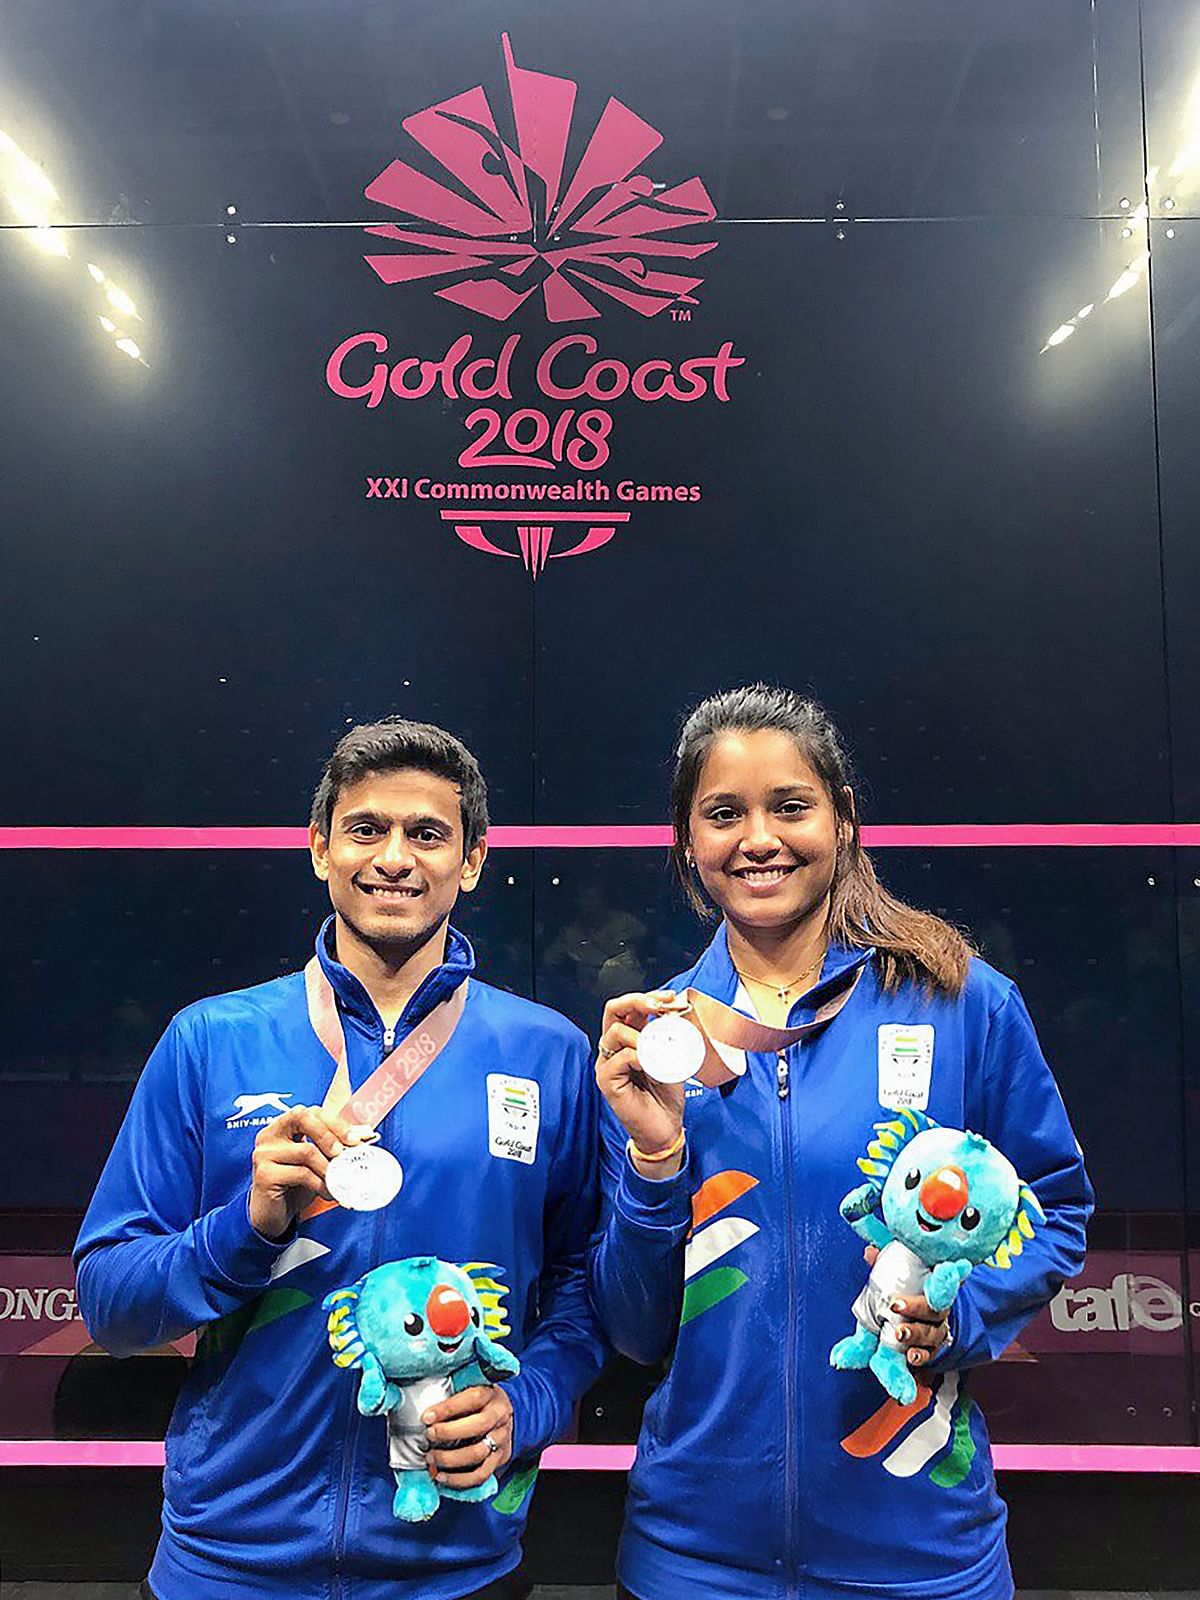 India finished the 2018 Commonwealth Games third with 26 gold medals, 20 silver ones and 20 bronze medals. 